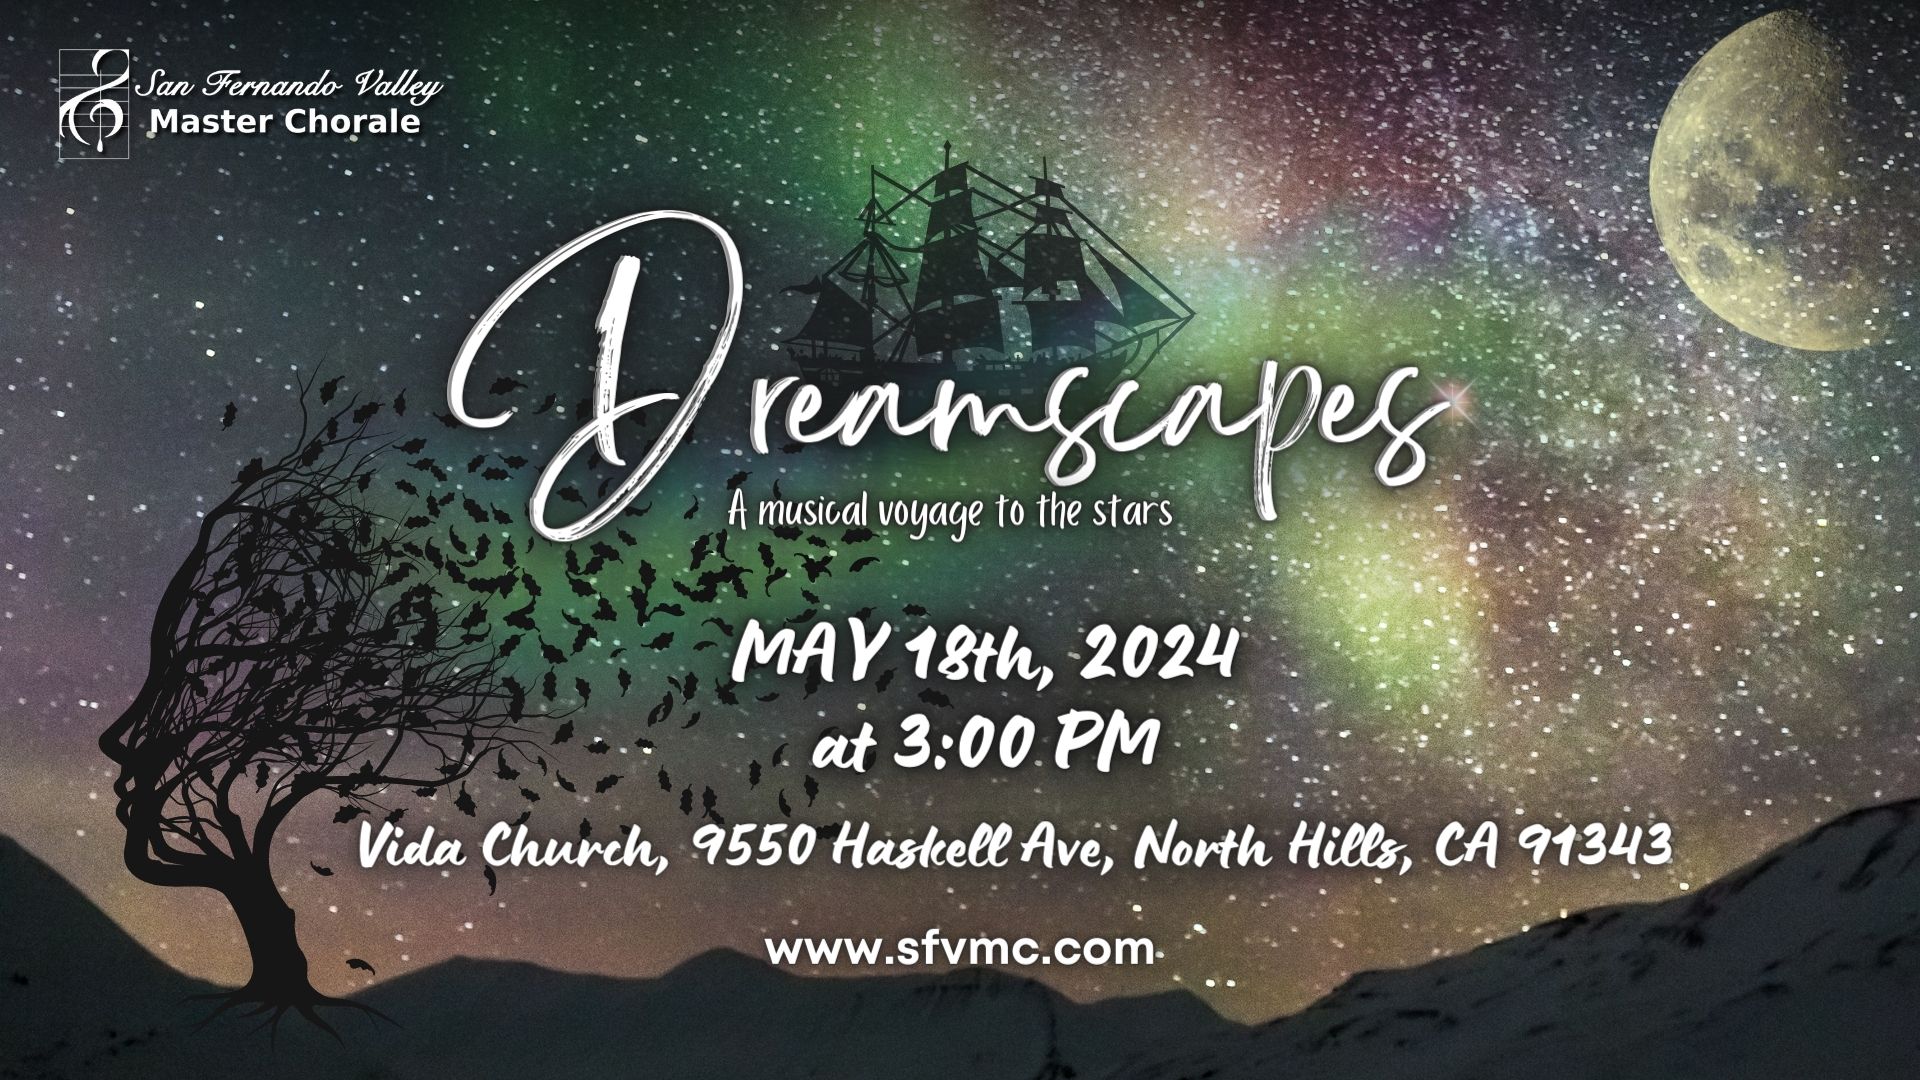 The image is a promotional poster for an event by the San Fernando Valley Master Chorale titled "Dansenpes: A musical voyage to the stars" happening on May 18th, 2024, at 3:00 PM at Vida Church in North Hills, CA. The poster features the event details and the website www.sfvmc.com.